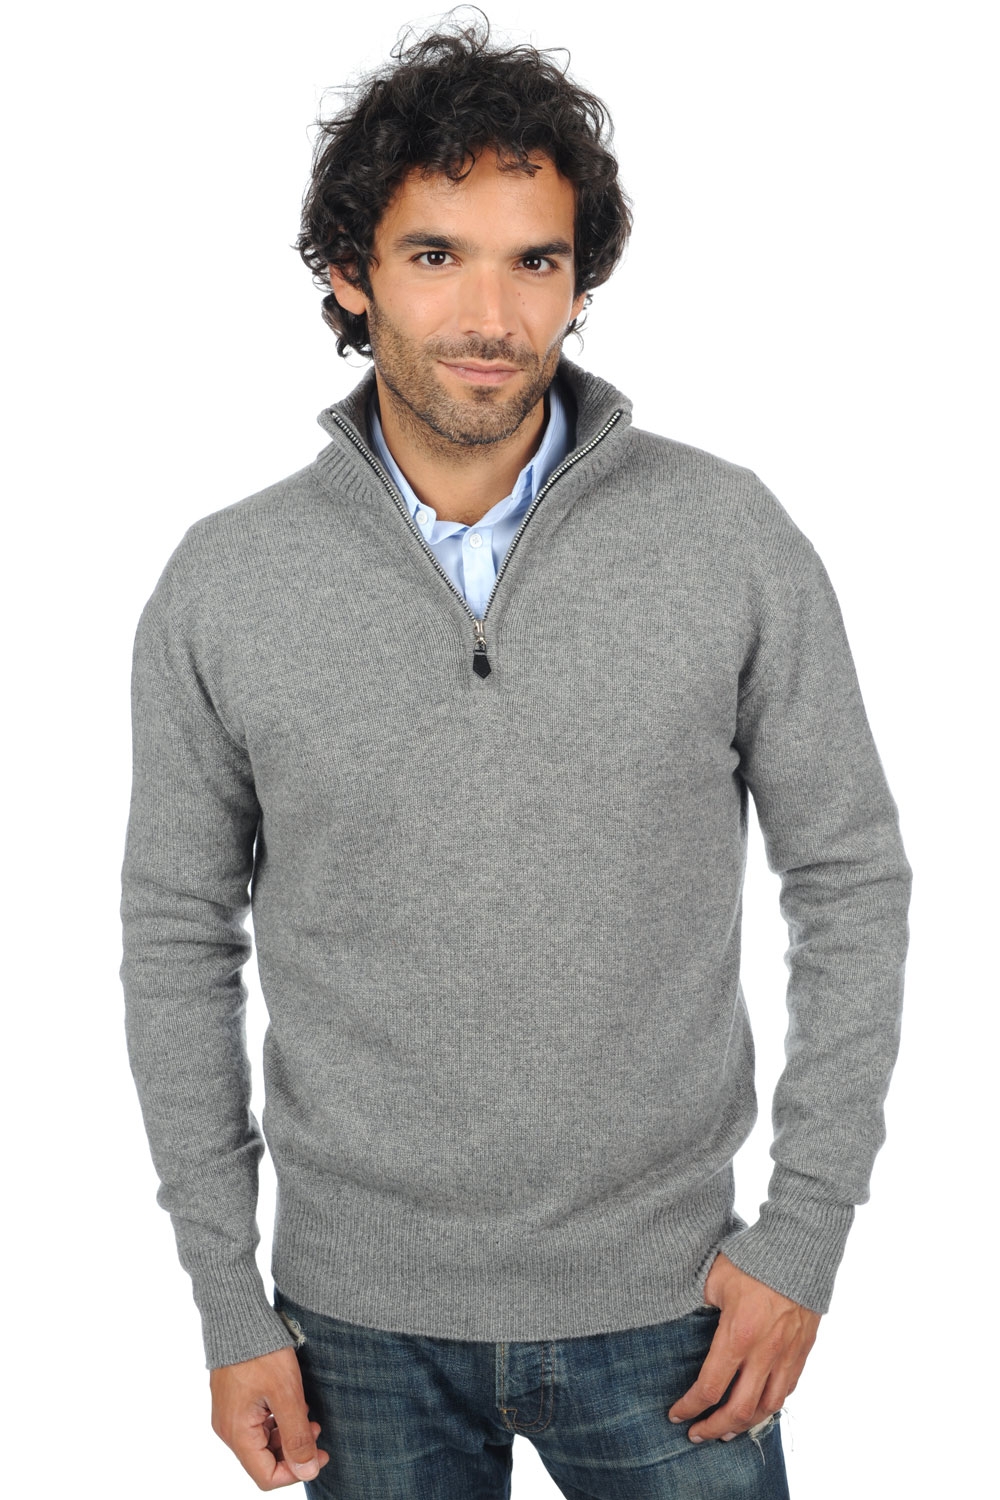 Cachemire pull homme donovan gris chine 2xl